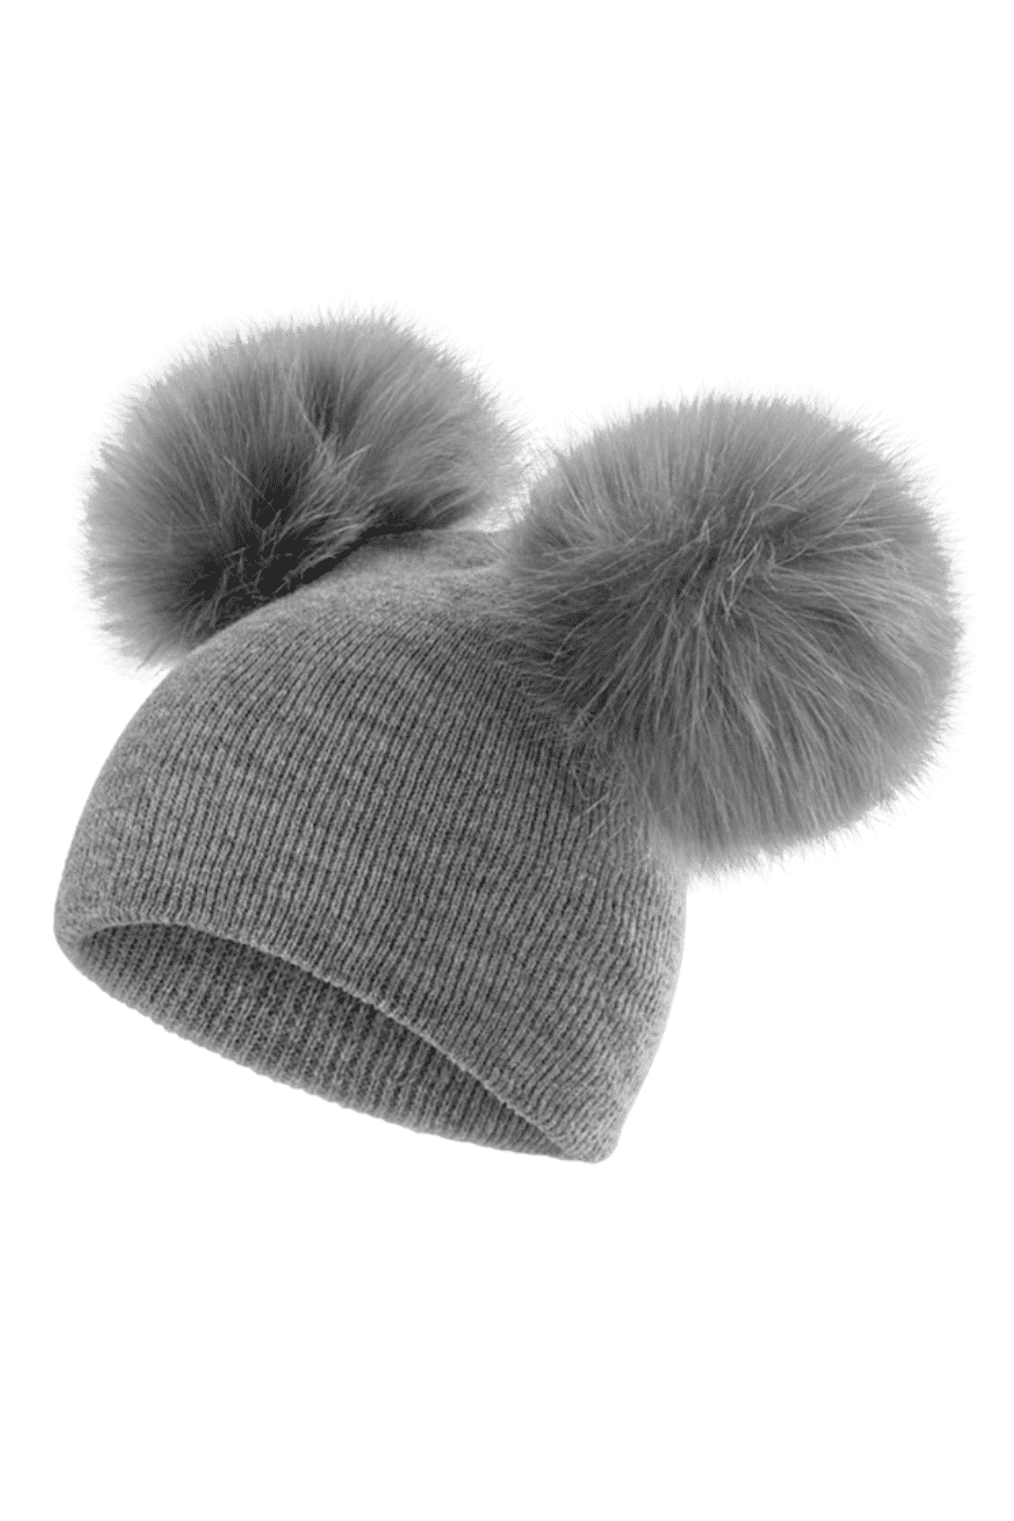 Double Pom Beanies! 3 Color Options Tea for Three: A Children's Boutique